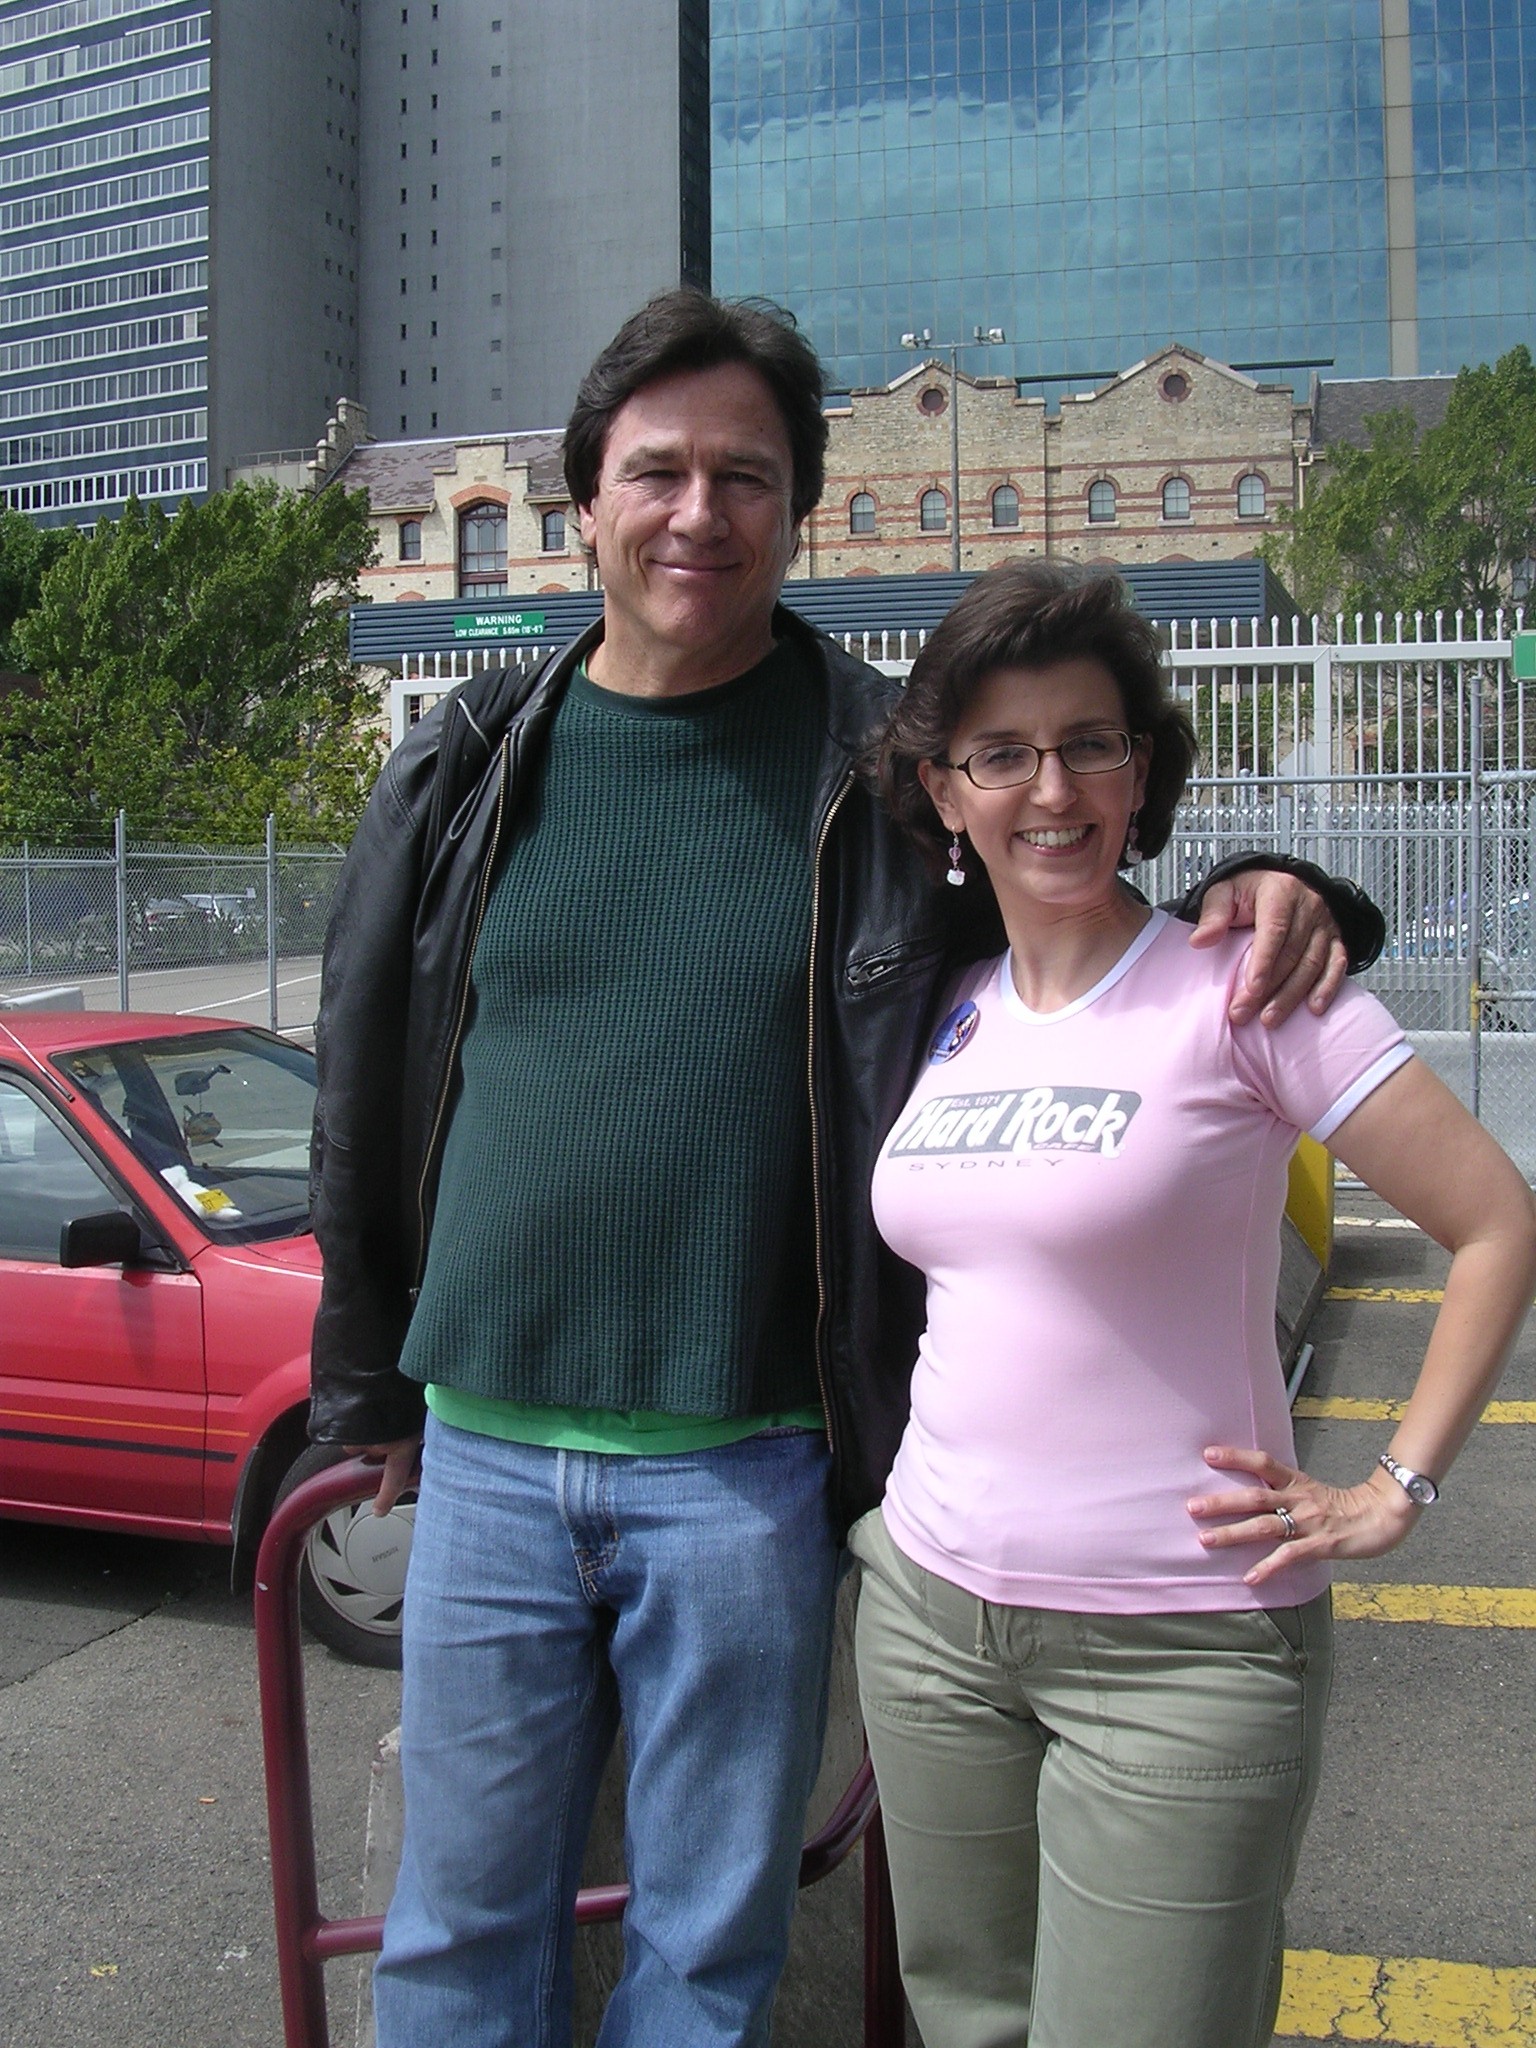 With Richard Hatch (I). Guest appearance at Supanova Pop Culture Expo in Sydney, Australia (2005).